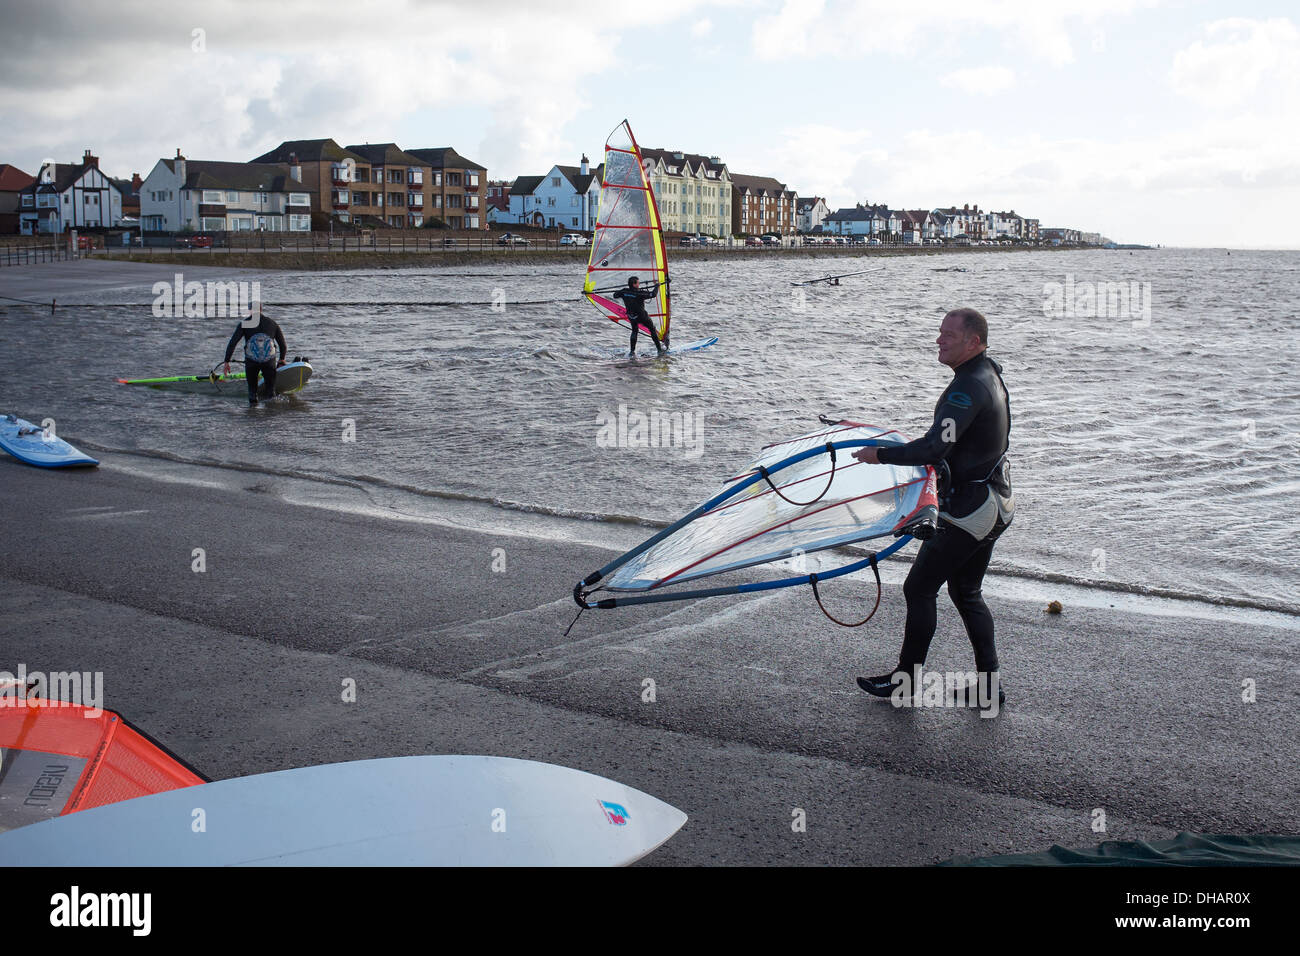 People windsurfing on the Marine Lake at West Kirby on the Wirral on a very cold blustery day Stock Photo